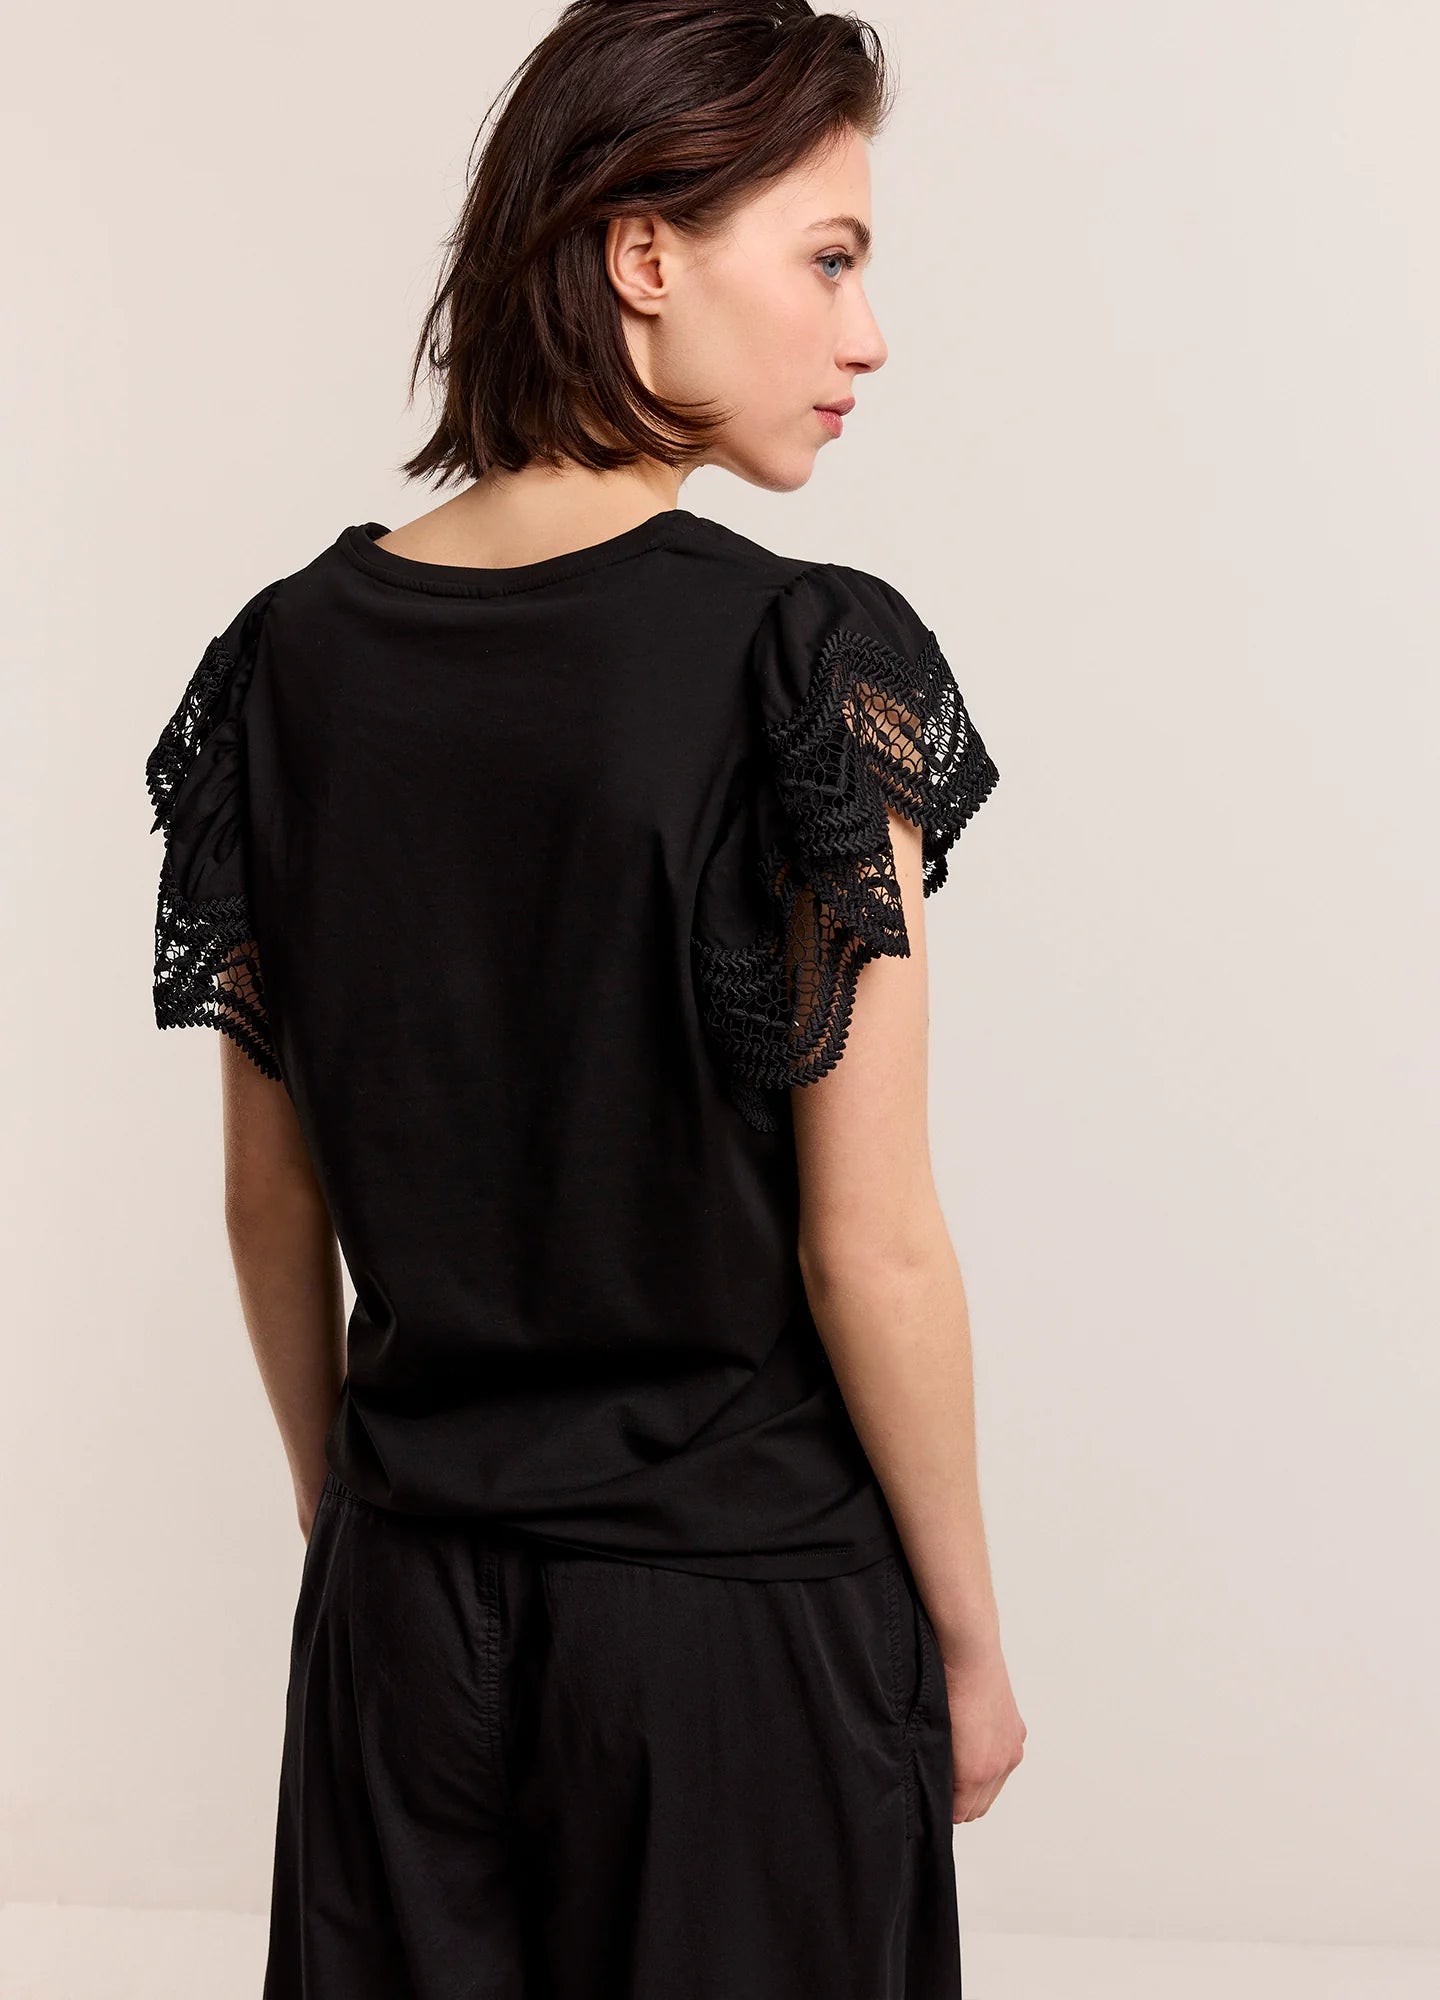 Jersey Top with Lace in Black